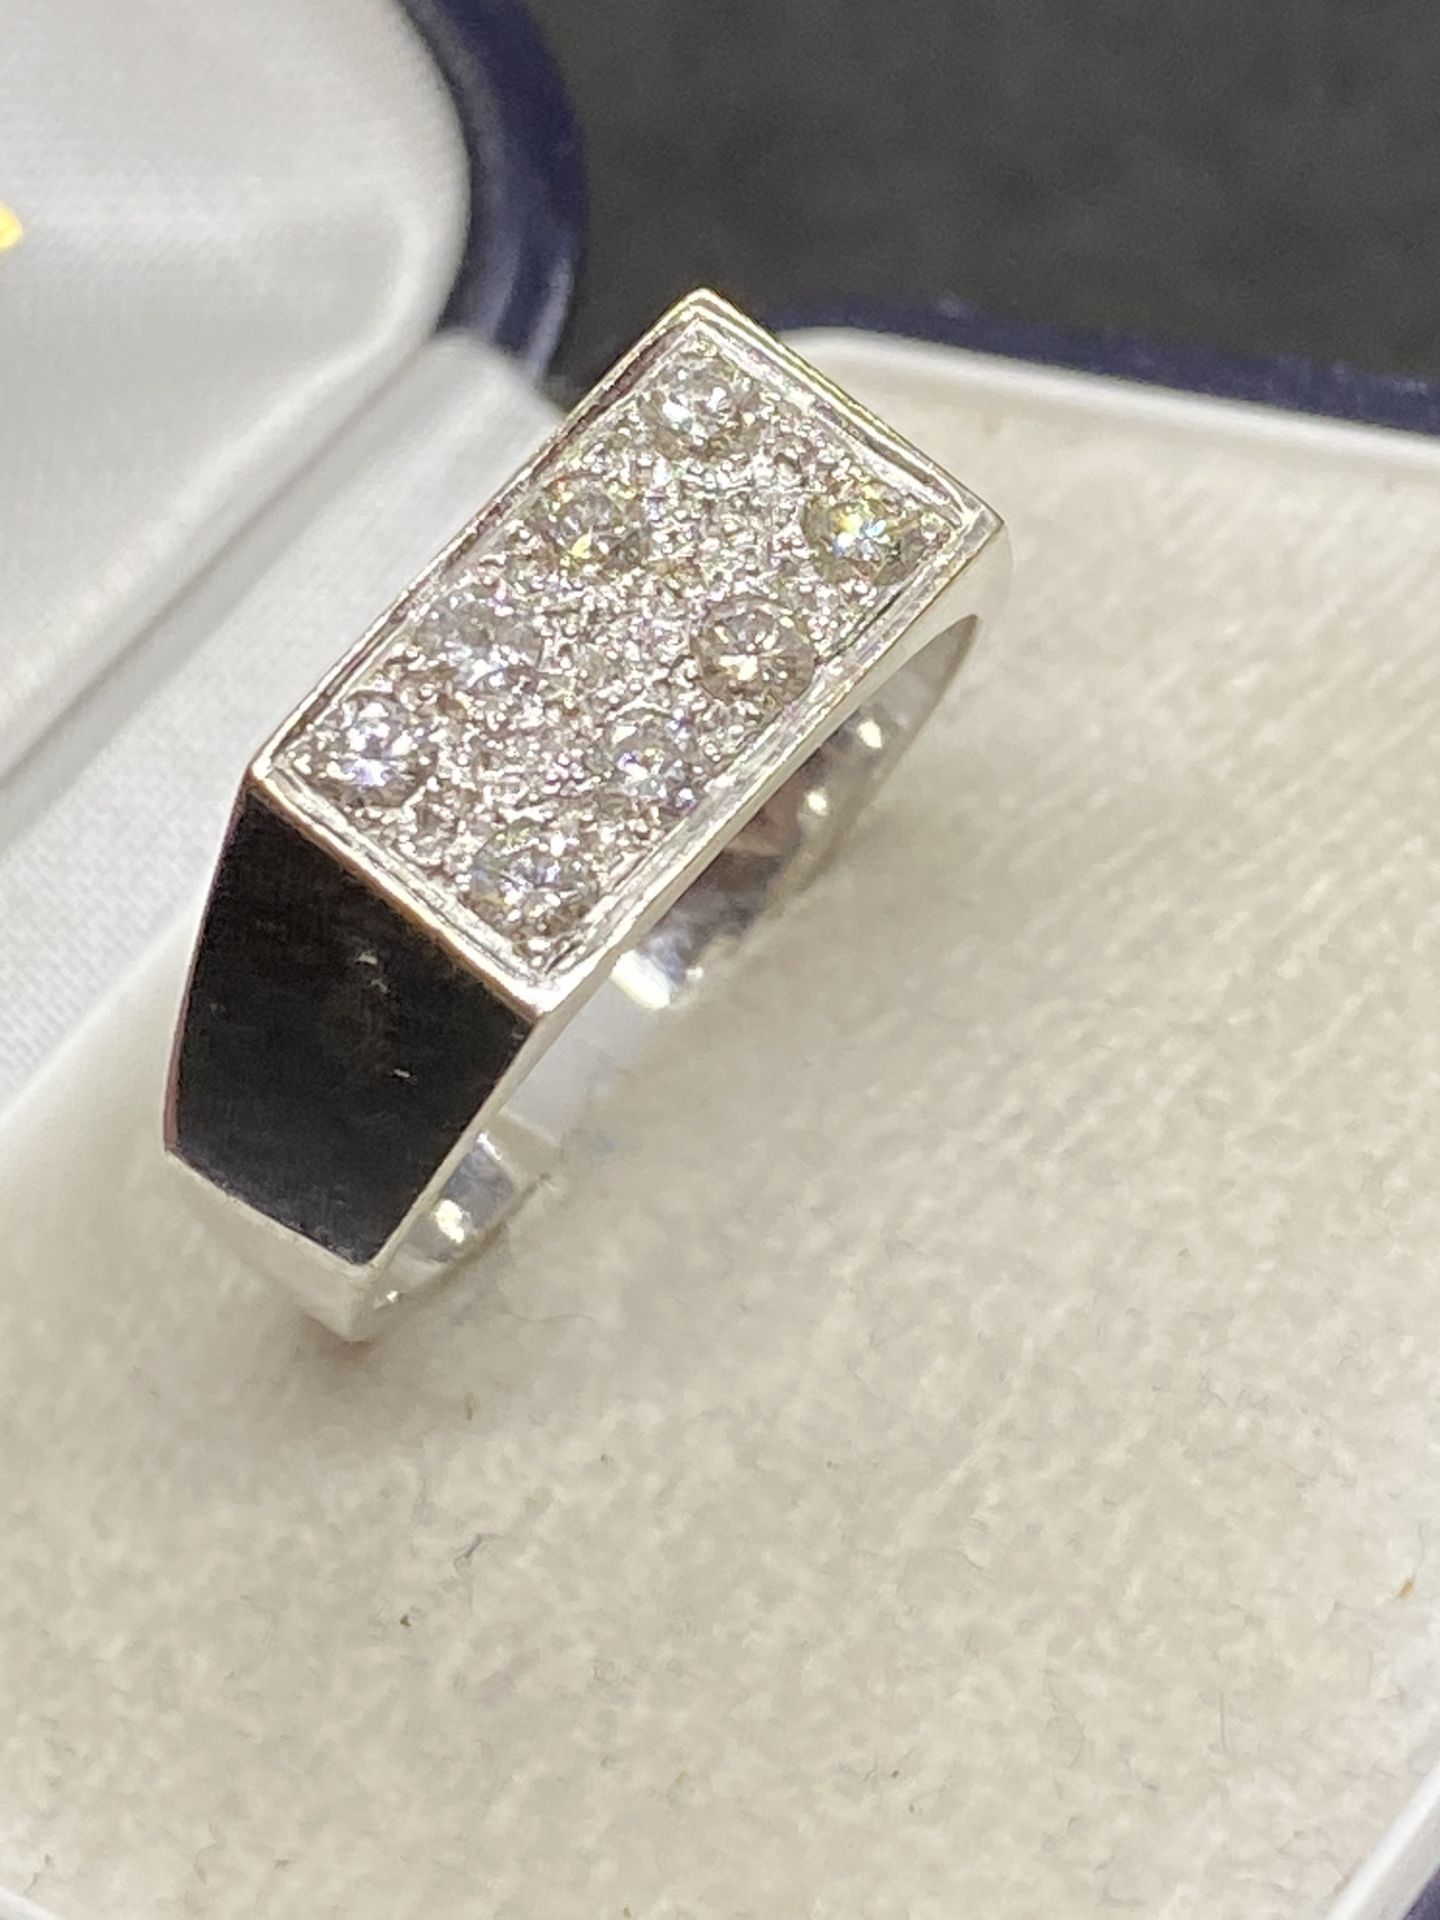 0.60ct DIAMOND RING SET IN WHITE METAL - TESTED AS 18ct GOLD - 9.8 GRAMS - Image 3 of 5